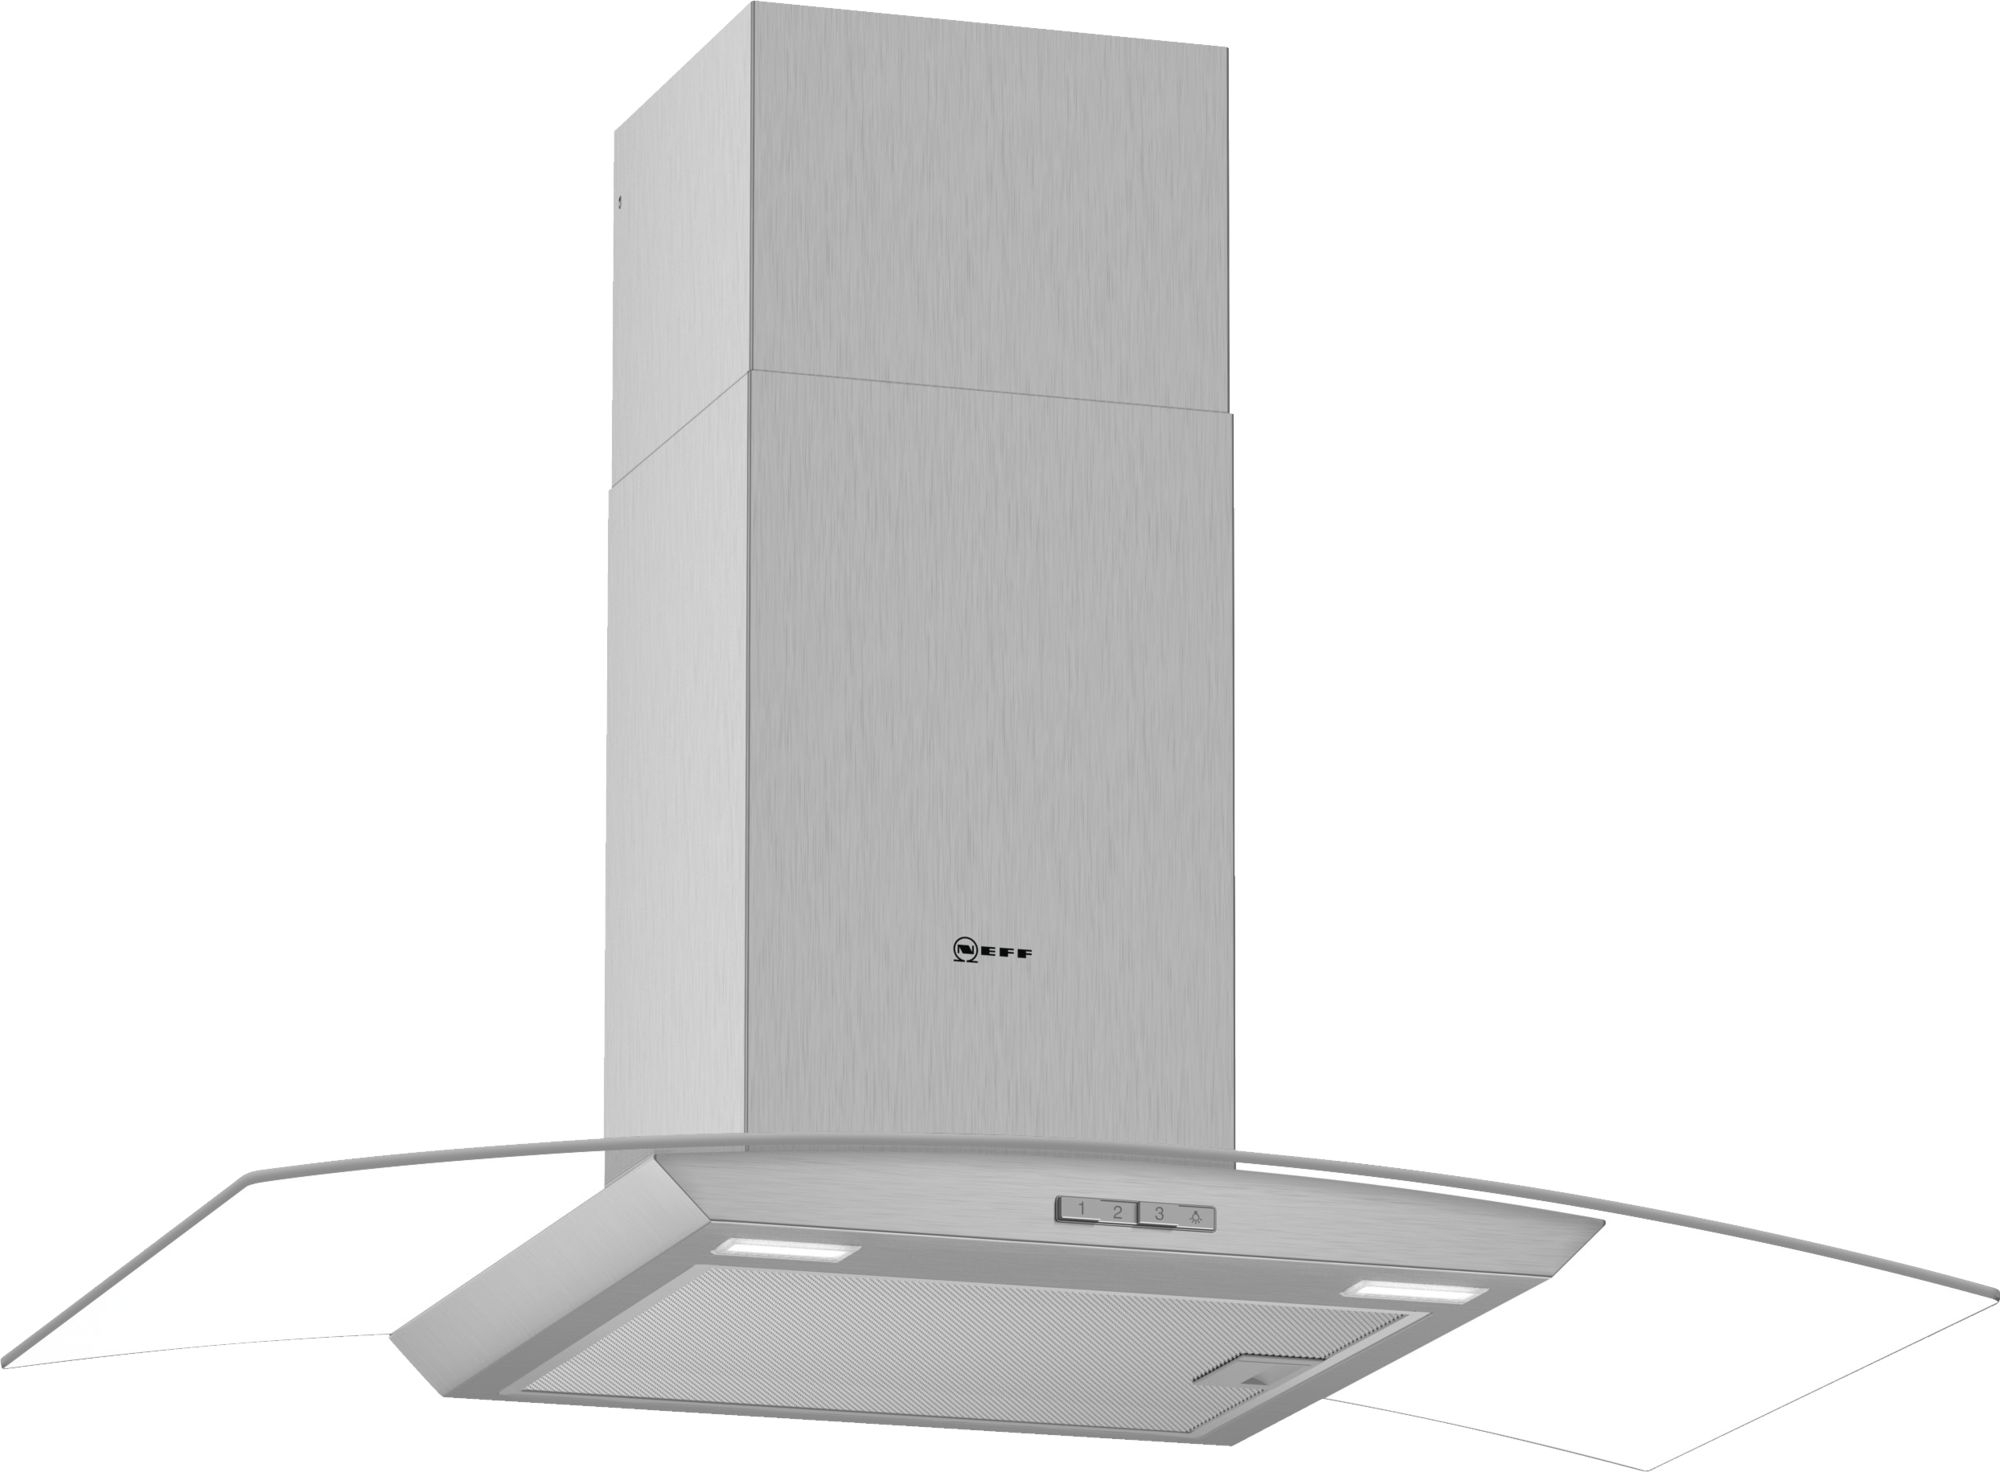 Neff D94ABC0N0B 90cm Curved Chimney Cooker Hood - Stainless Steel